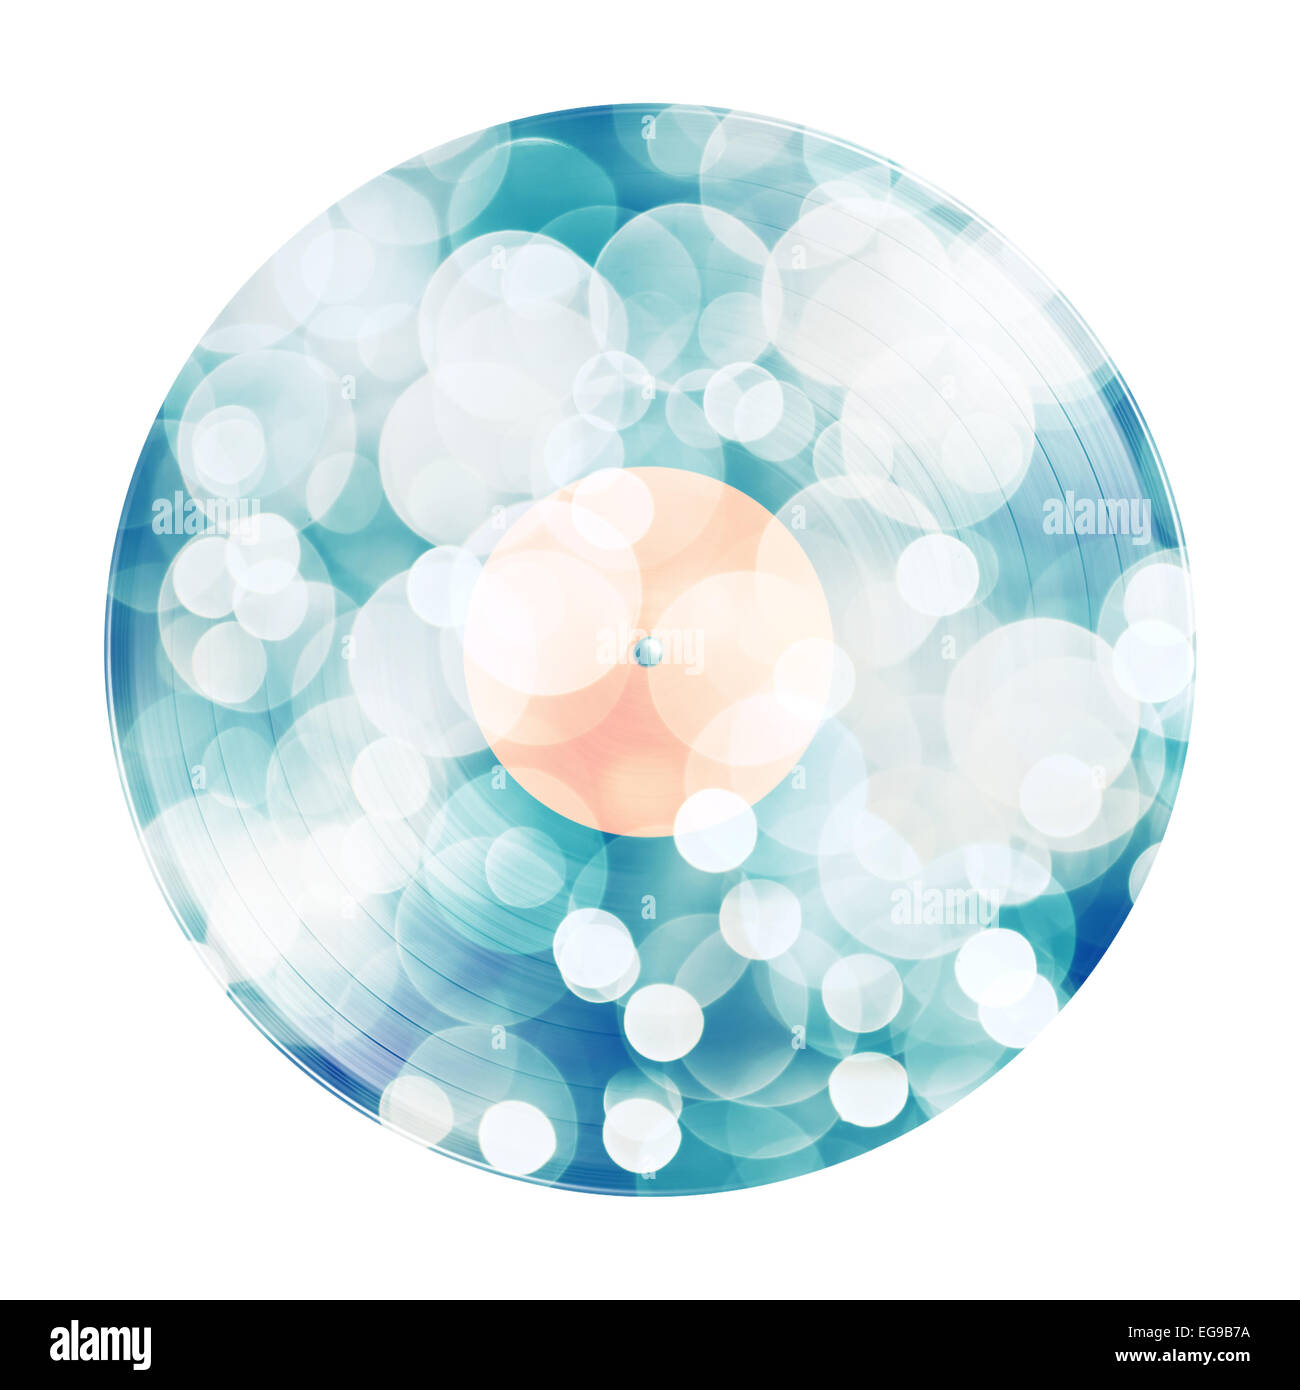 Music background made of vinyl record and abstract bubble texture Stock Photo